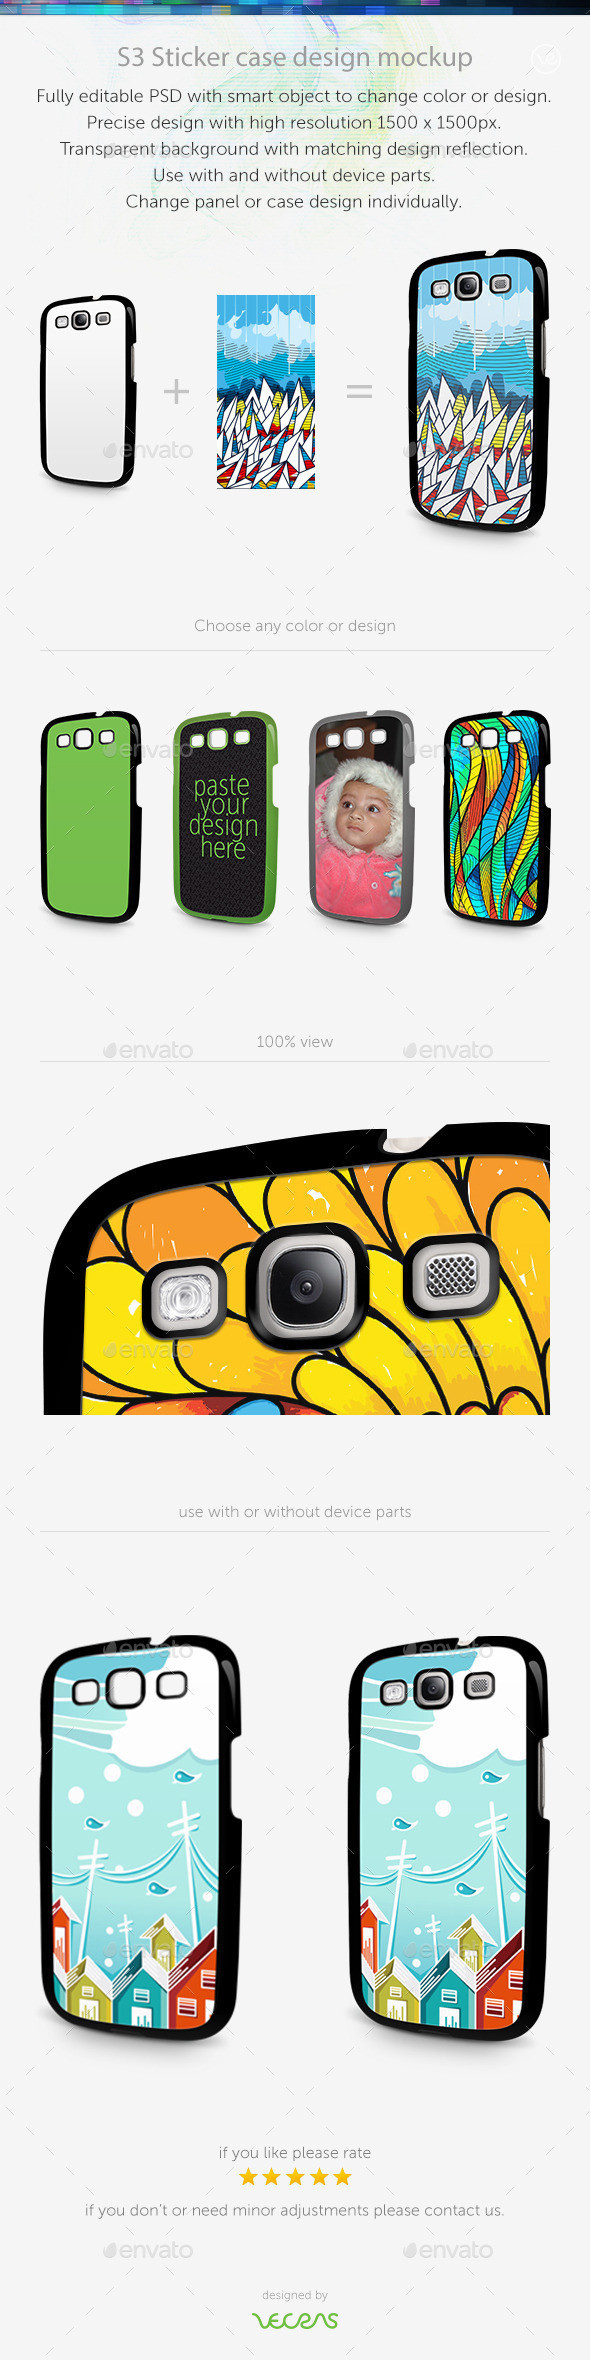 Preview s3 stickercase mockup angled